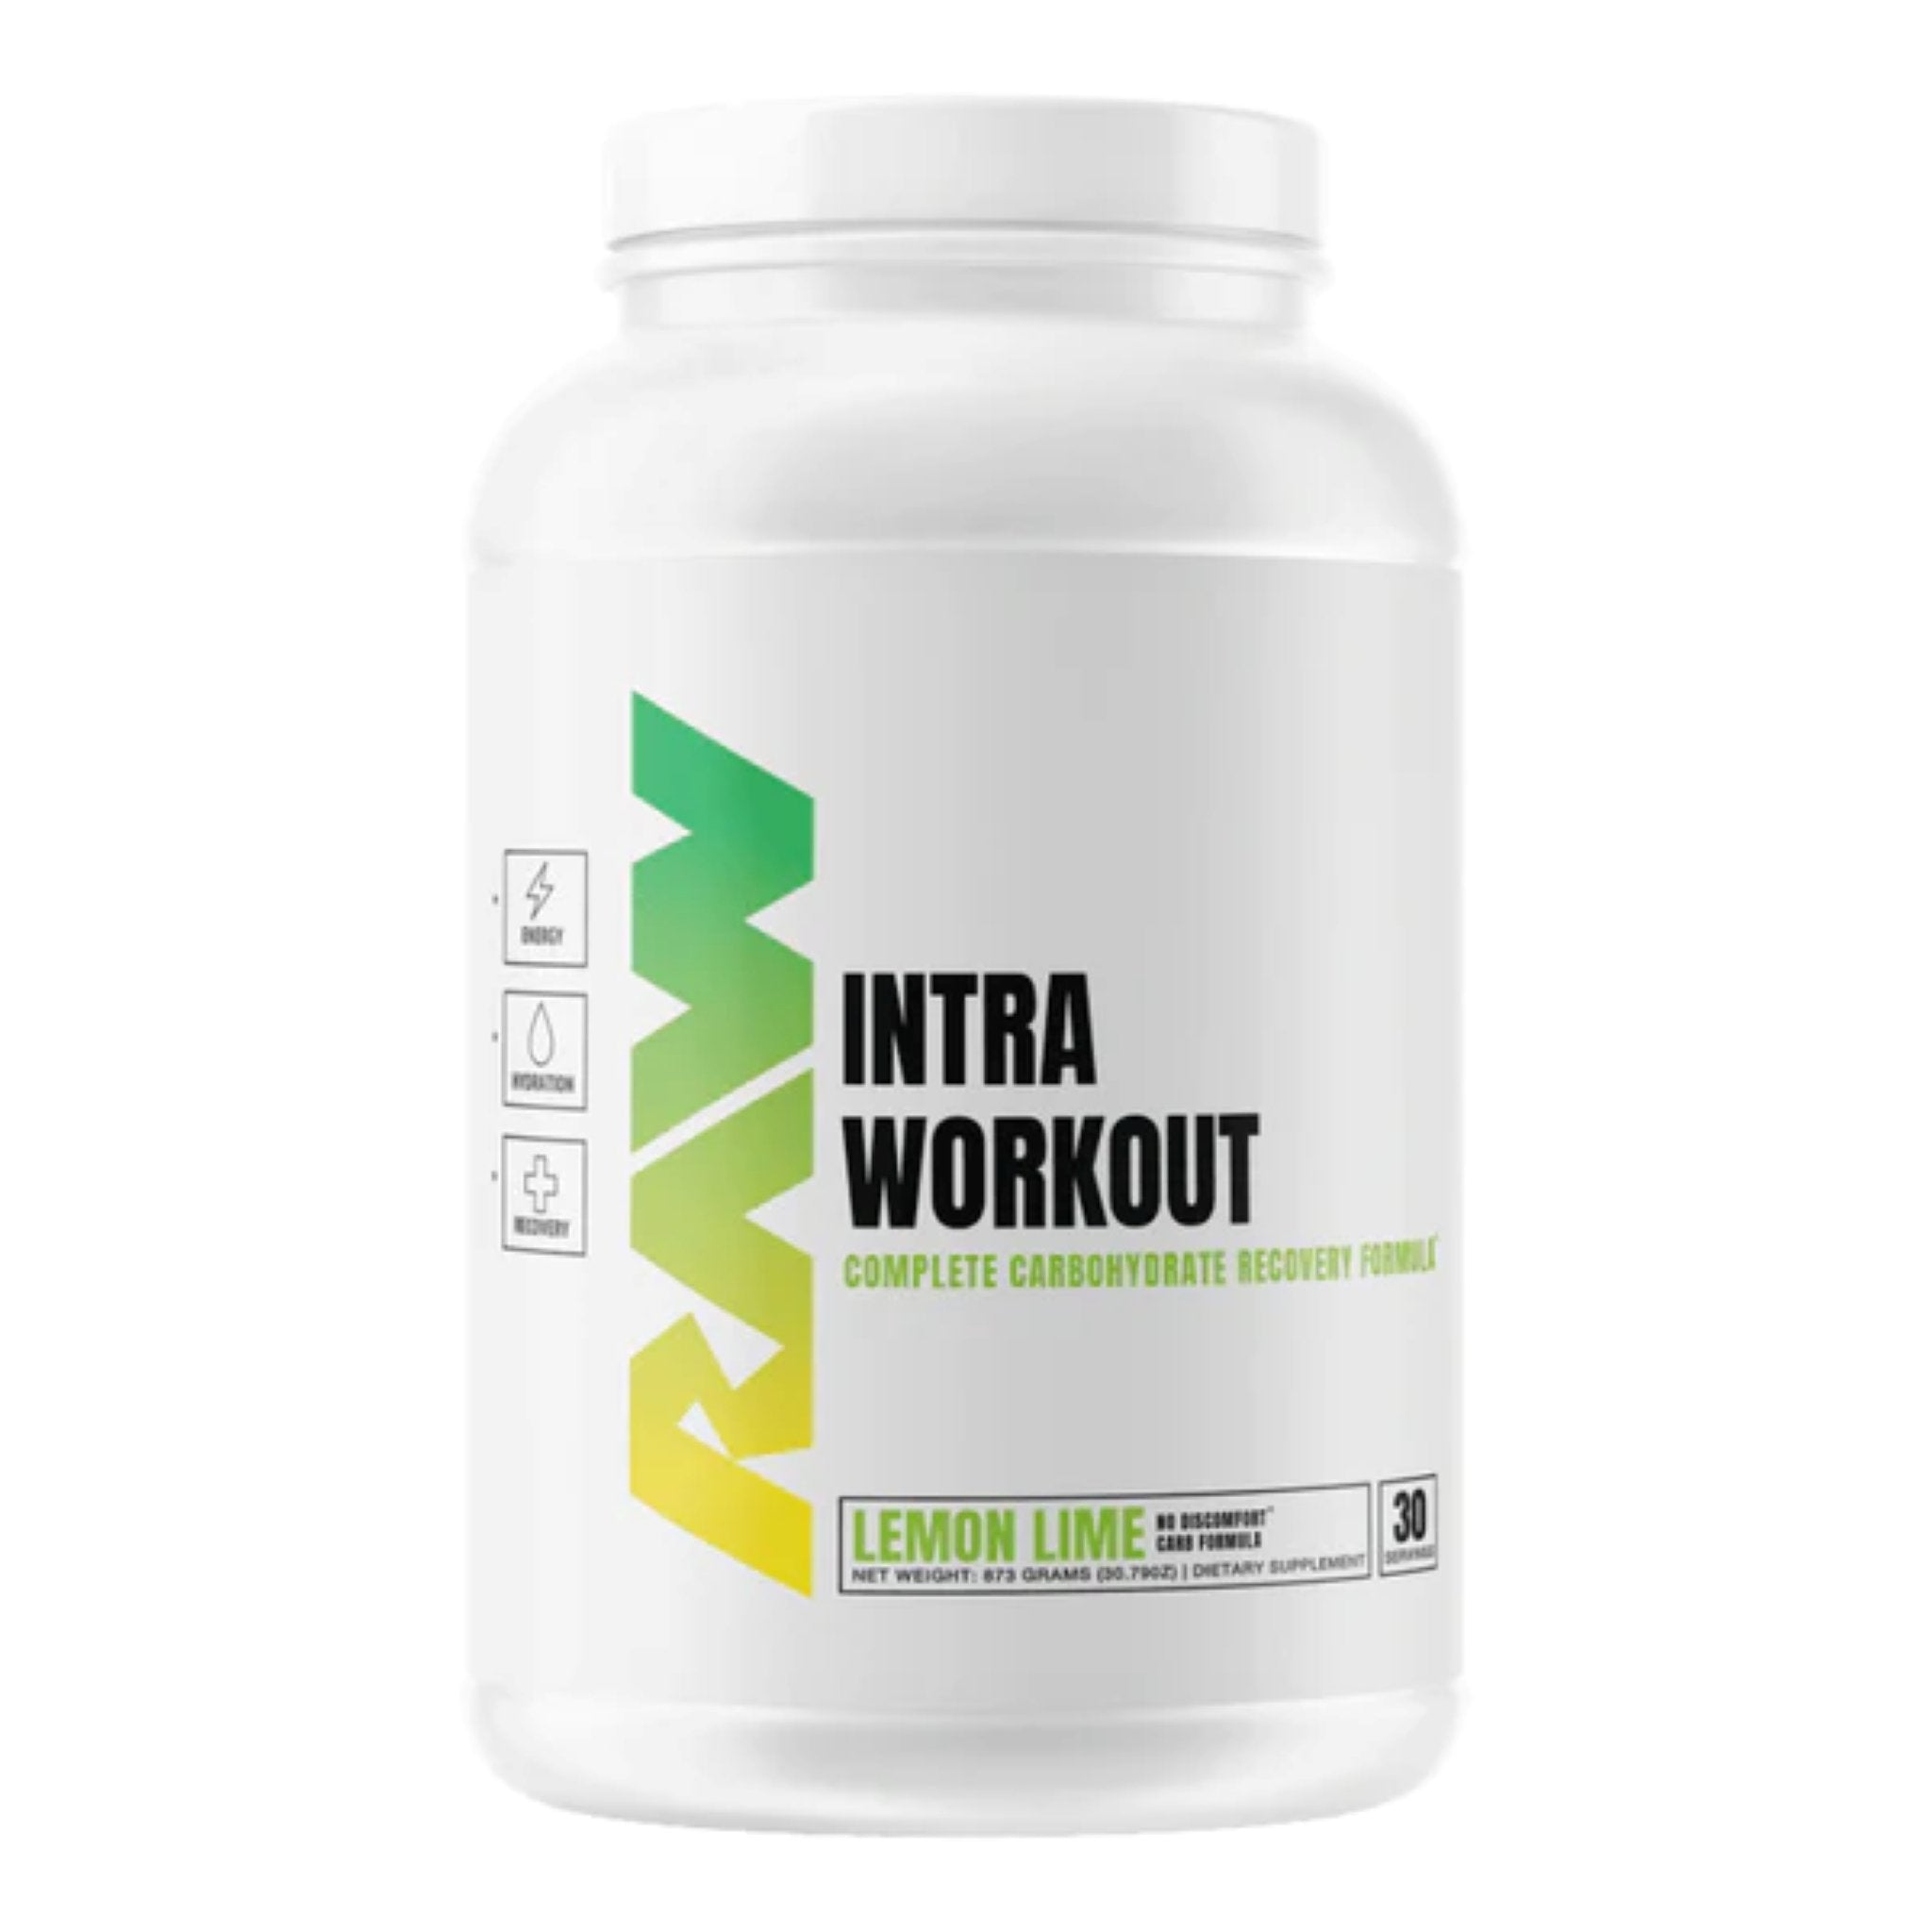 in cat timp intra banii din paypal pe card Supliment alimentar Intra Workout, RAW Nutrition, INTRA-WORKOUT, 873g